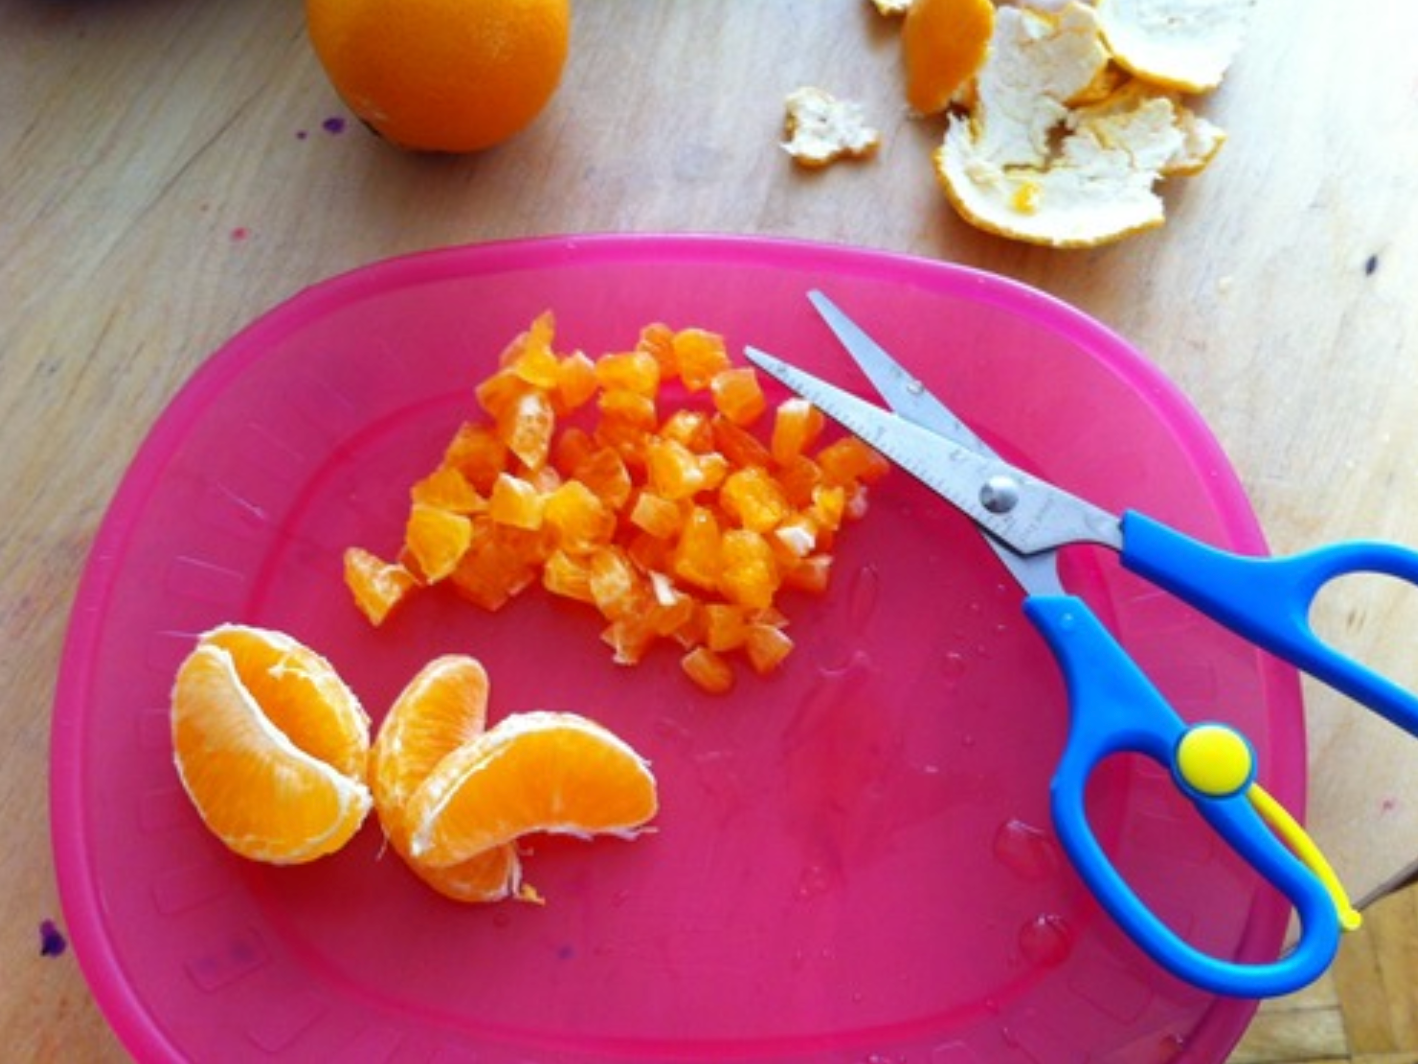 Reviewer image of mandarin orange slices cut up into tiny pieces by the scissors 